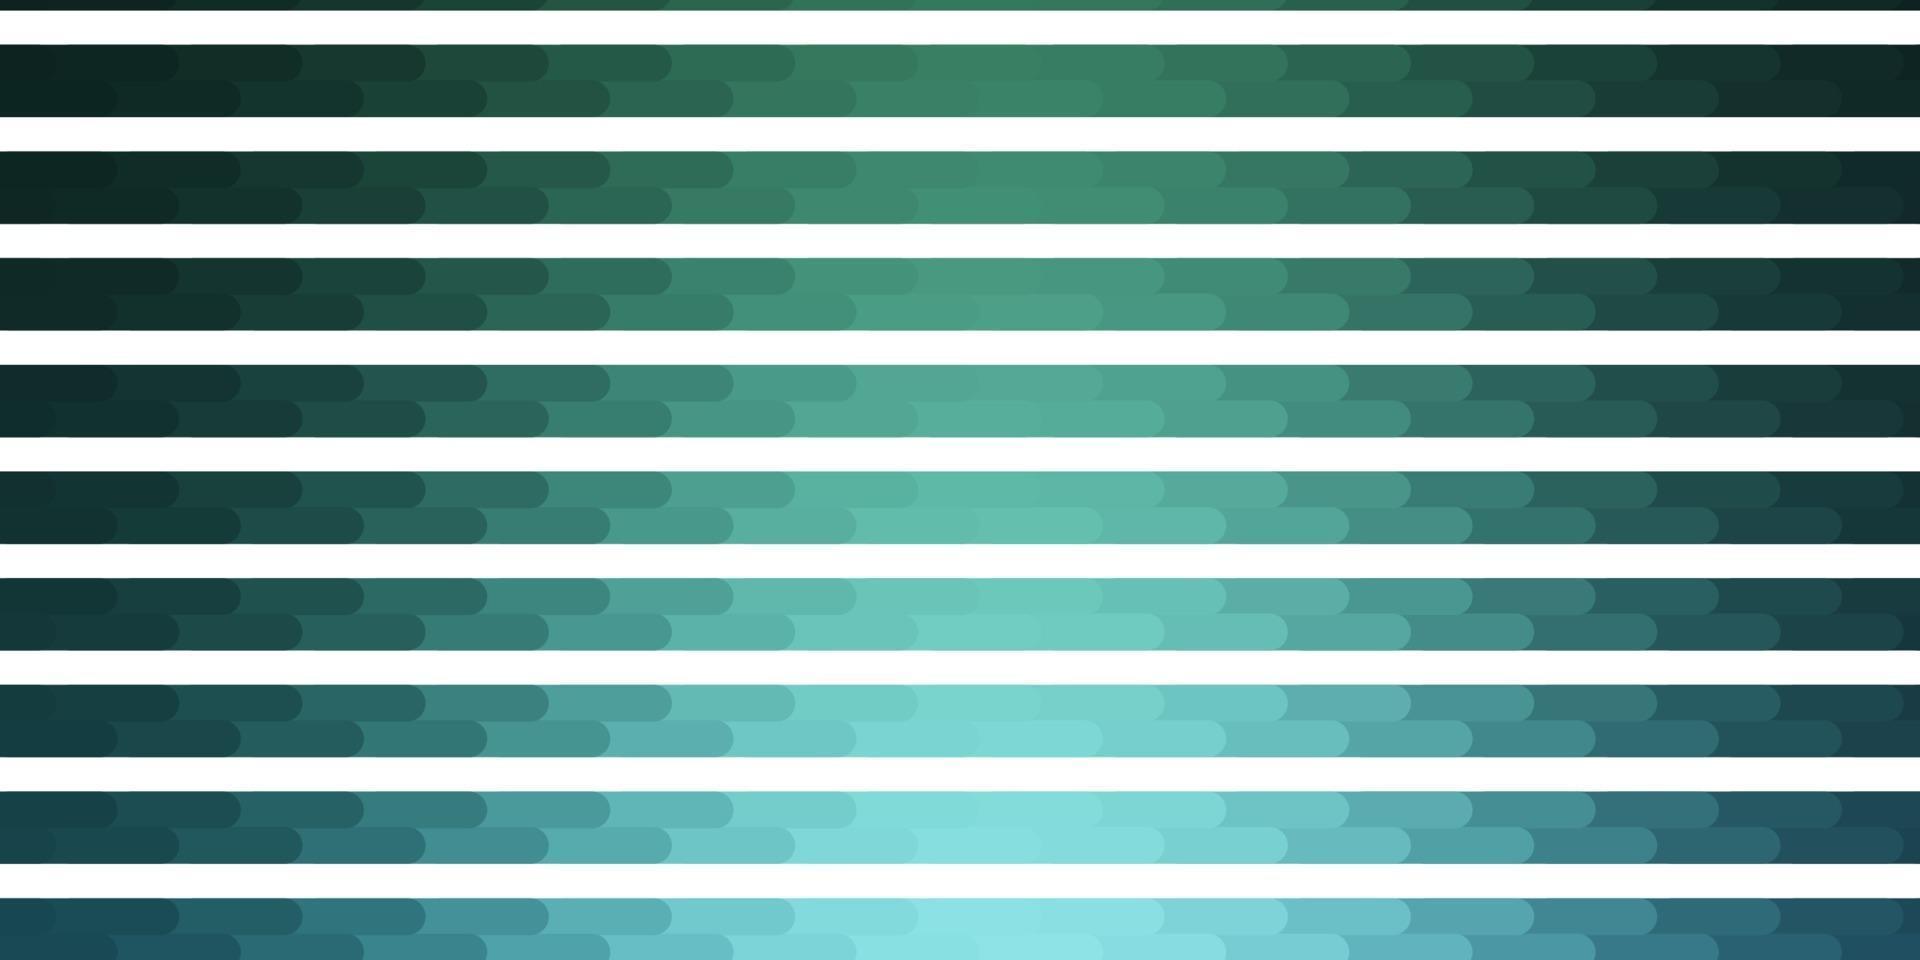 Light Blue, Green vector background with lines.